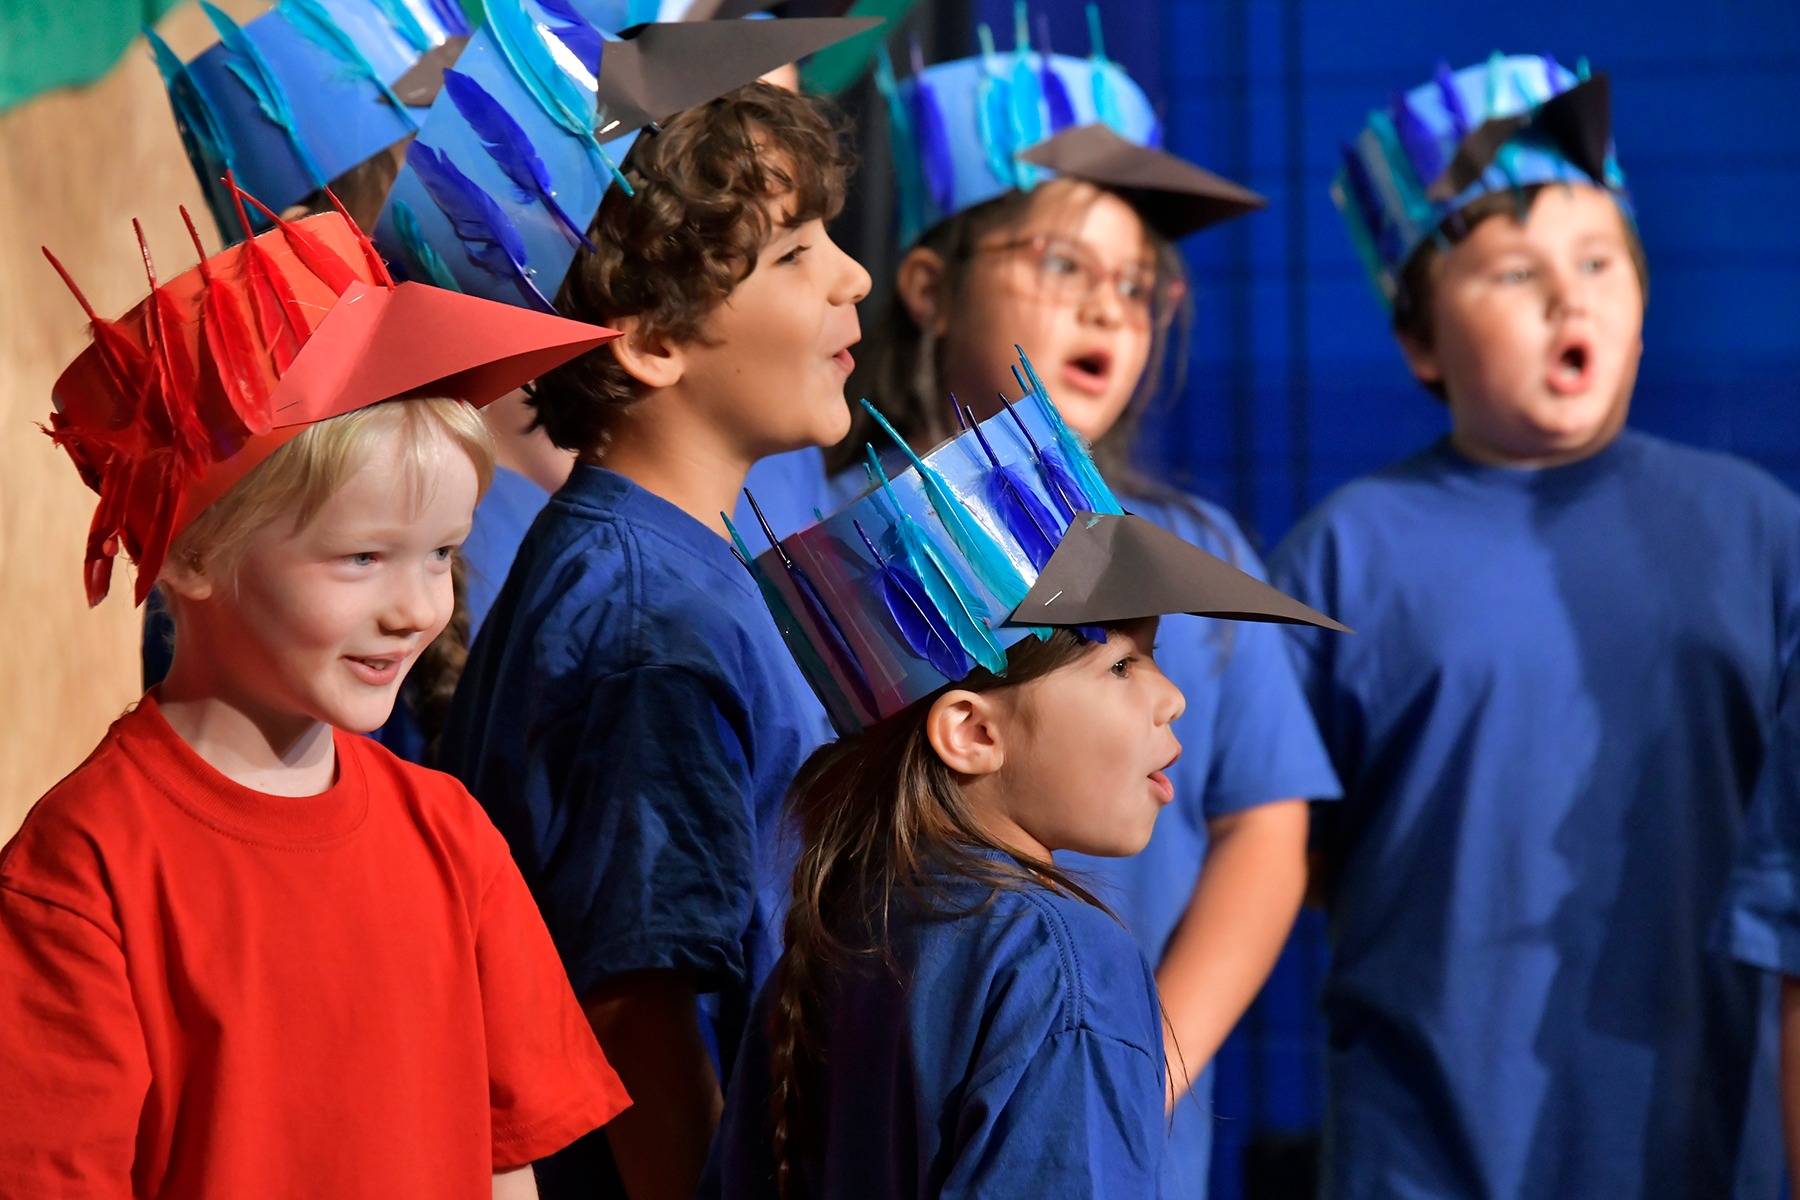 Collier students in blue and red costumes sing during their OMA performance